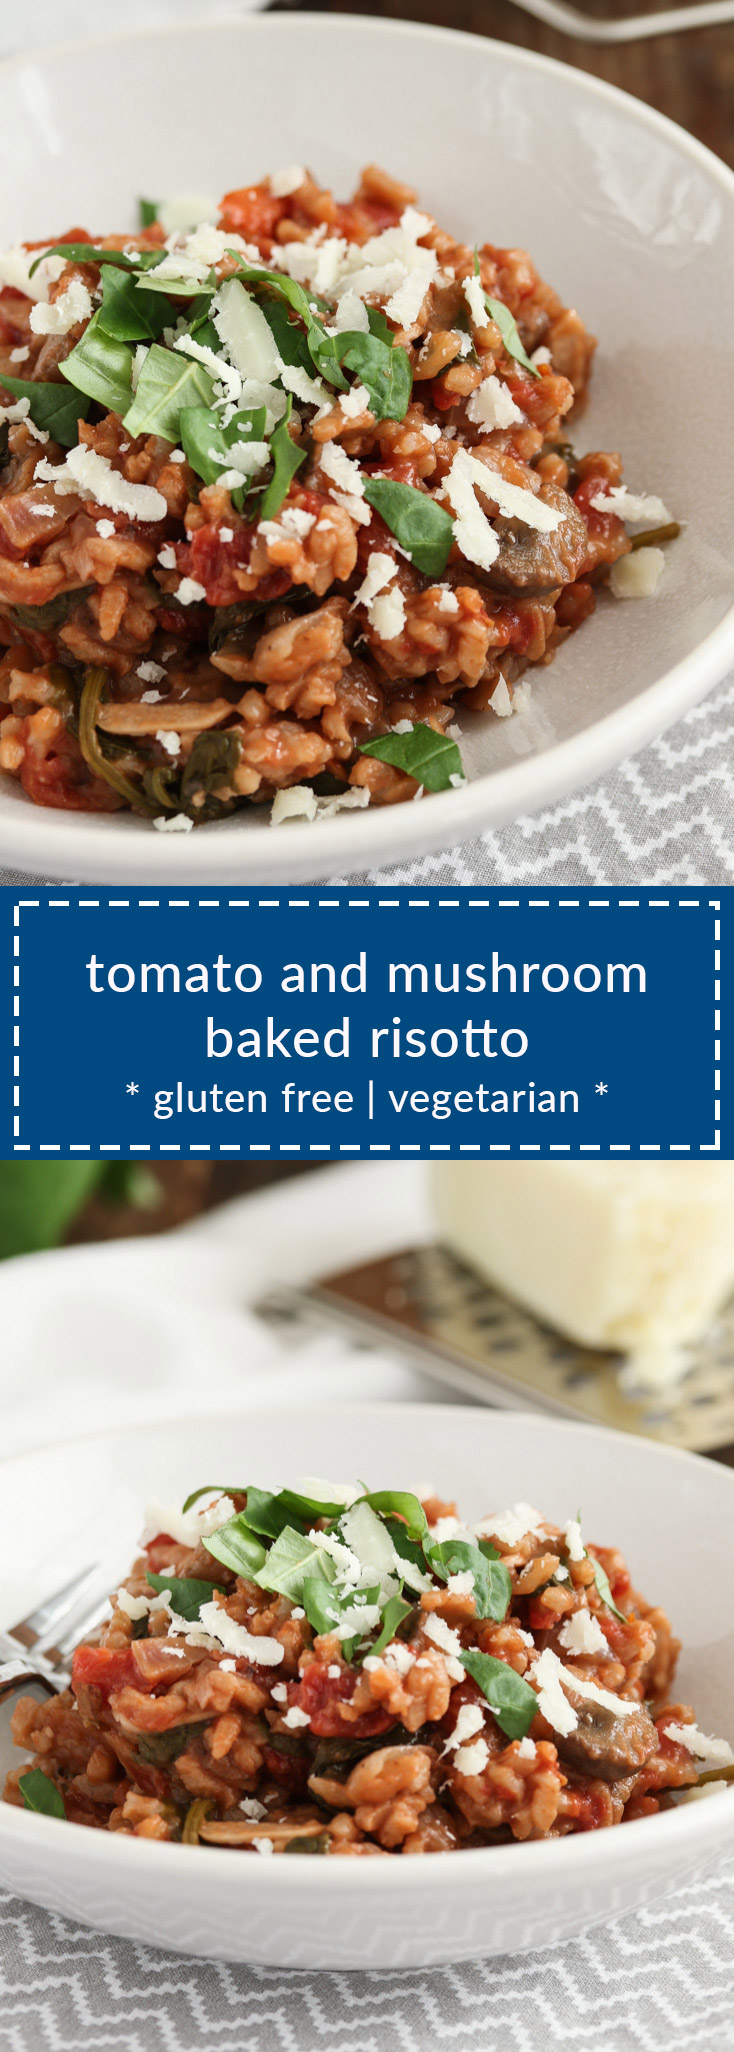 tomato and mushroom baked risotto is easy to prepare since it doesn’t require constant stirring for 30 minutes. it bakes in 20 minutes and reheats well.